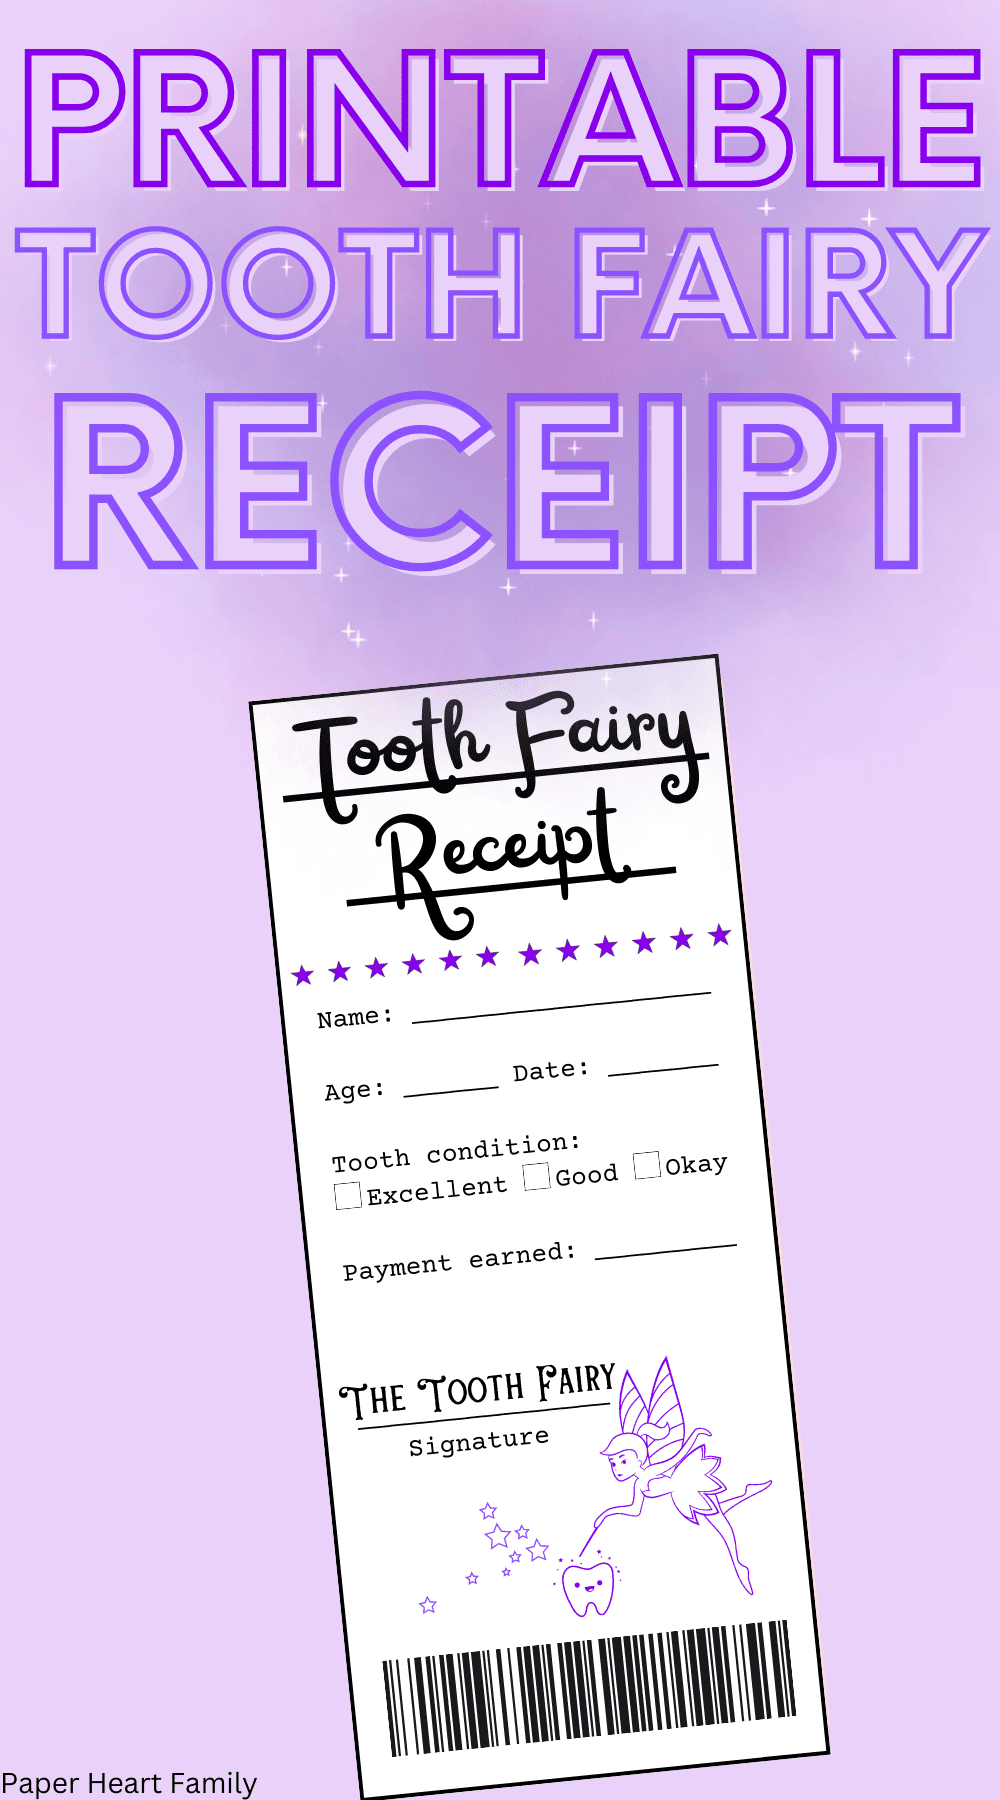 Free Printable Tooth Fairy Receipt (For Boy Or Girl,) Images